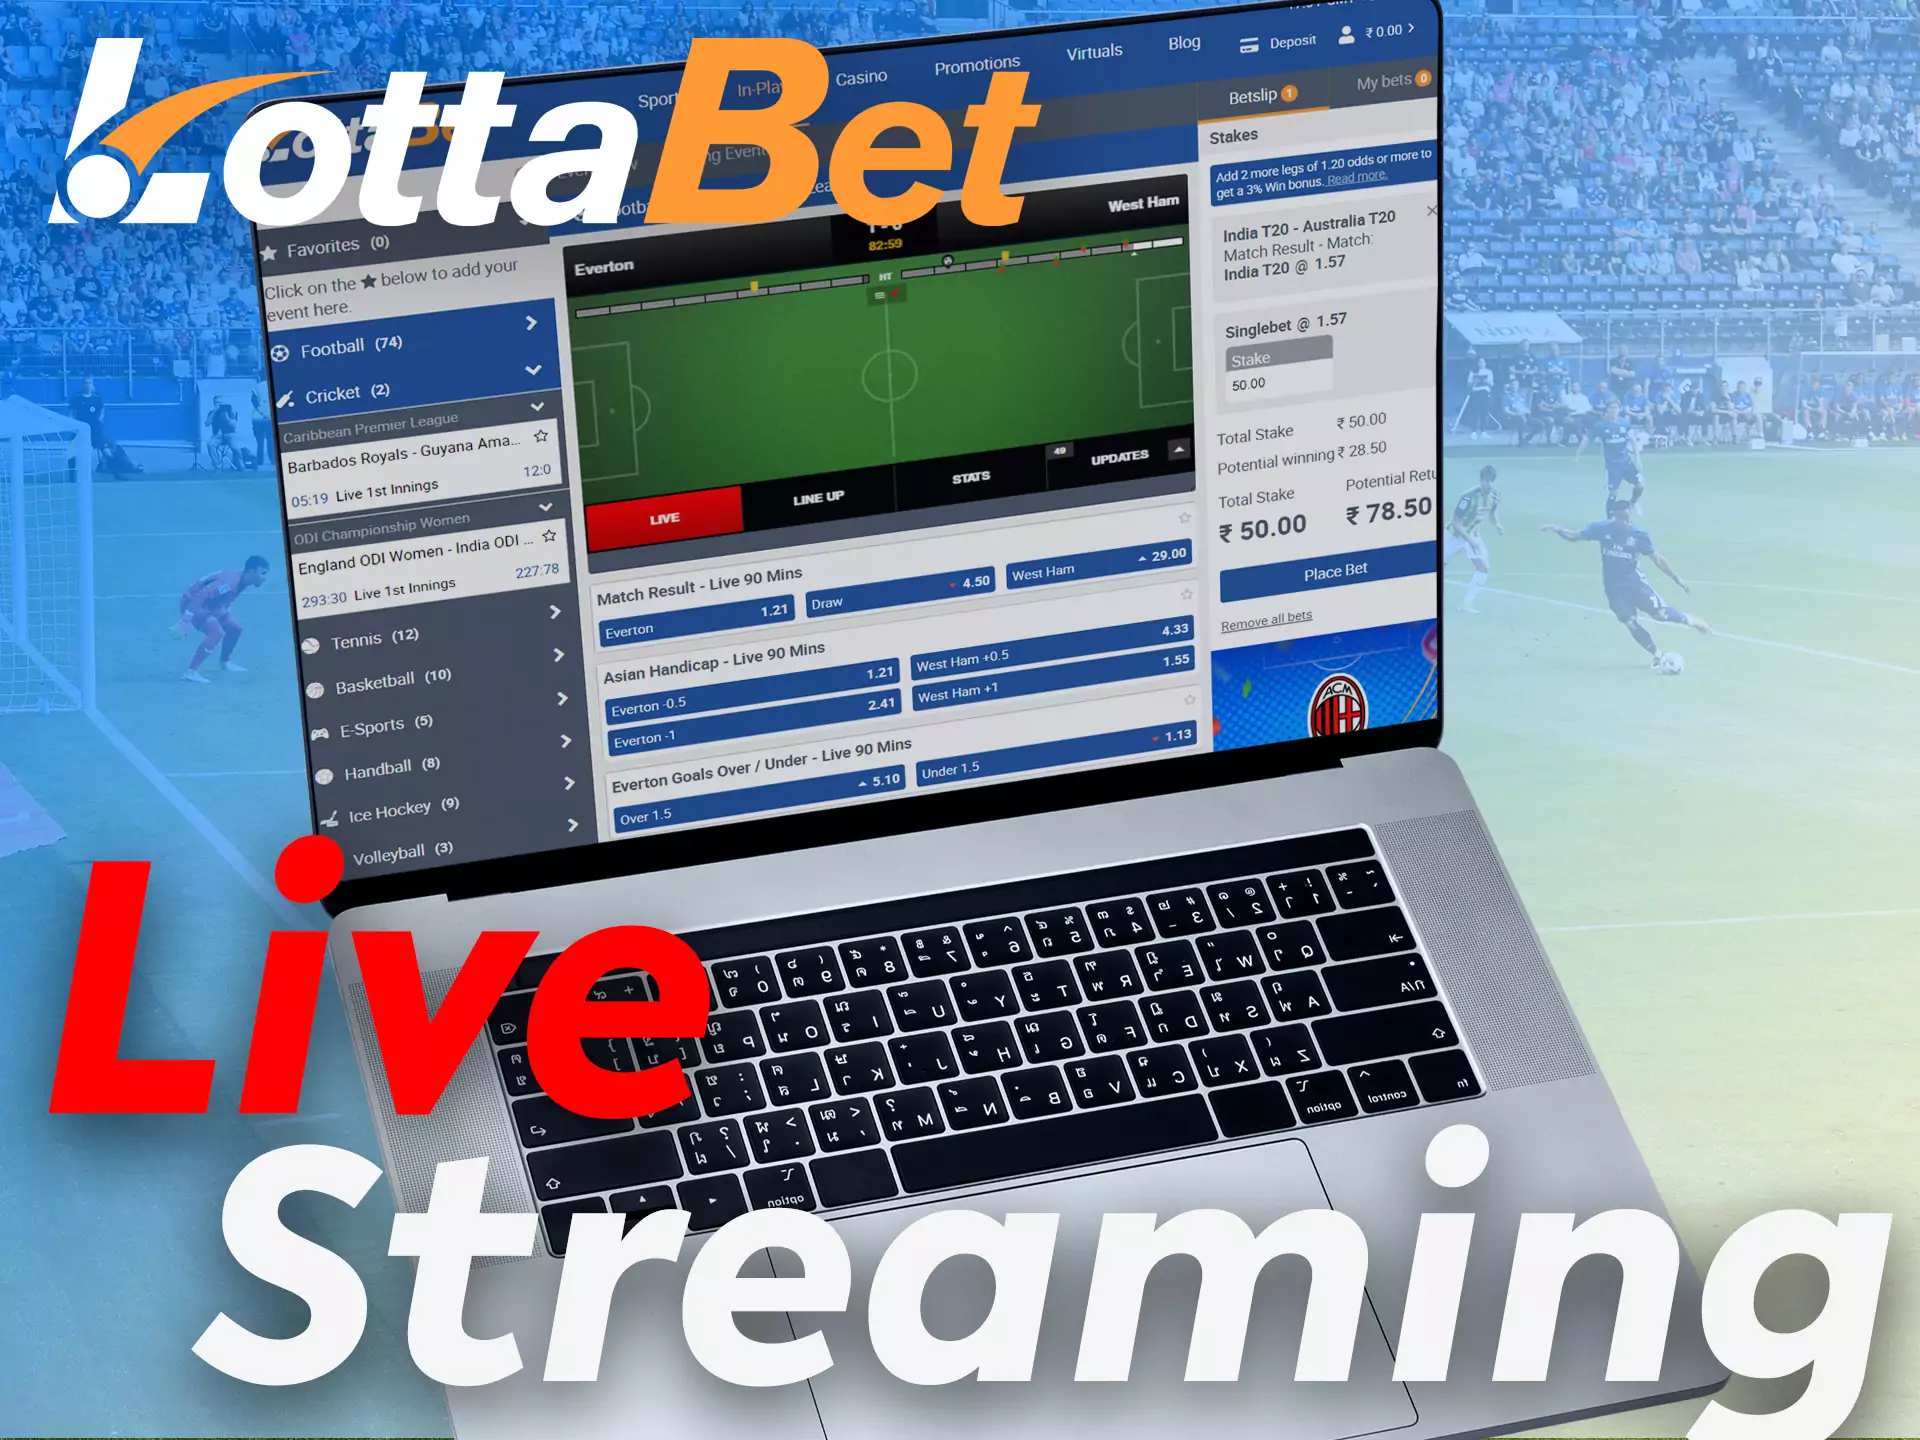 Follow live matches right on the Lottabet website.